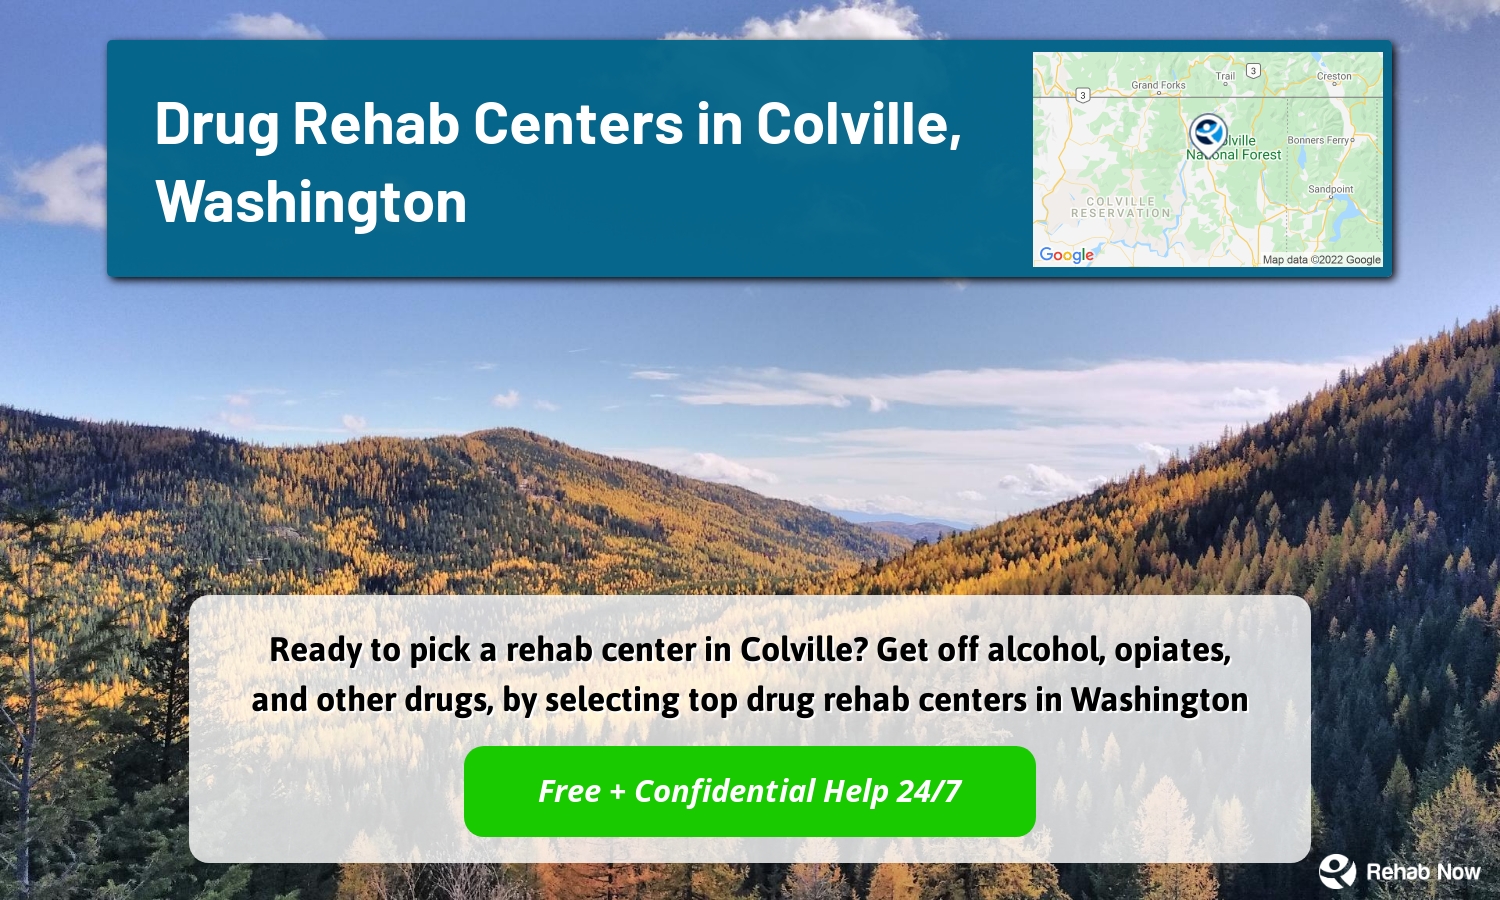 Ready to pick a rehab center in Colville? Get off alcohol, opiates, and other drugs, by selecting top drug rehab centers in Washington